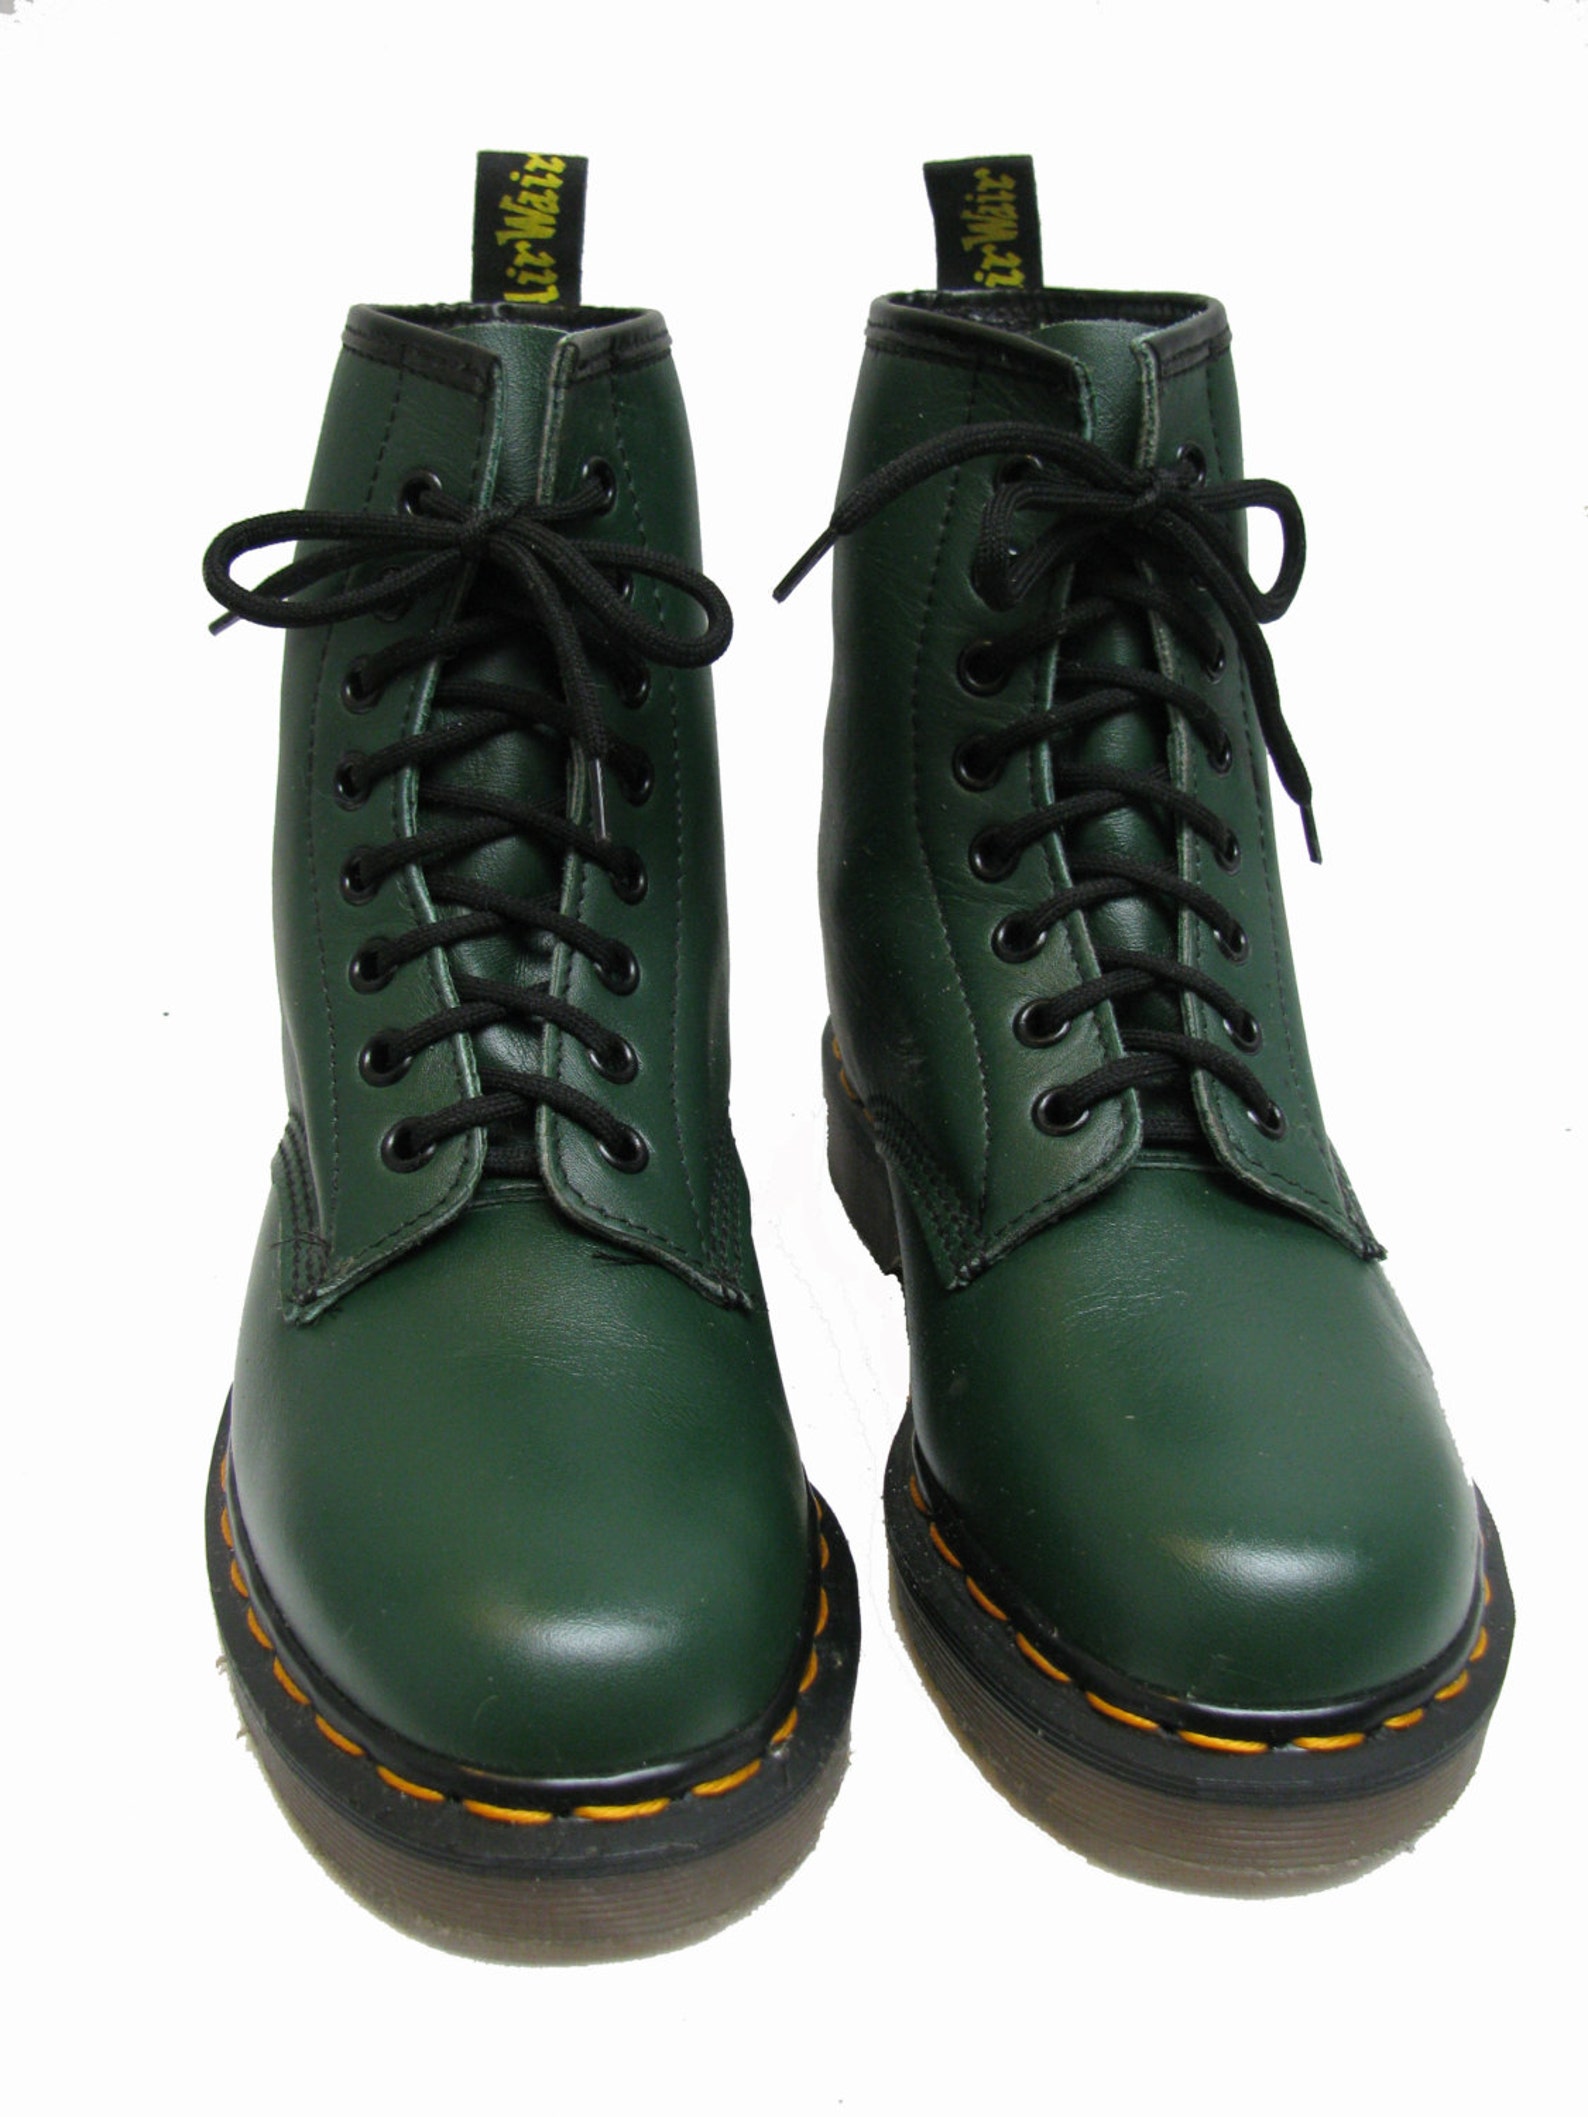 Green Dr Martens Boots Vintage 1980s Womens Doc Martens | Etsy